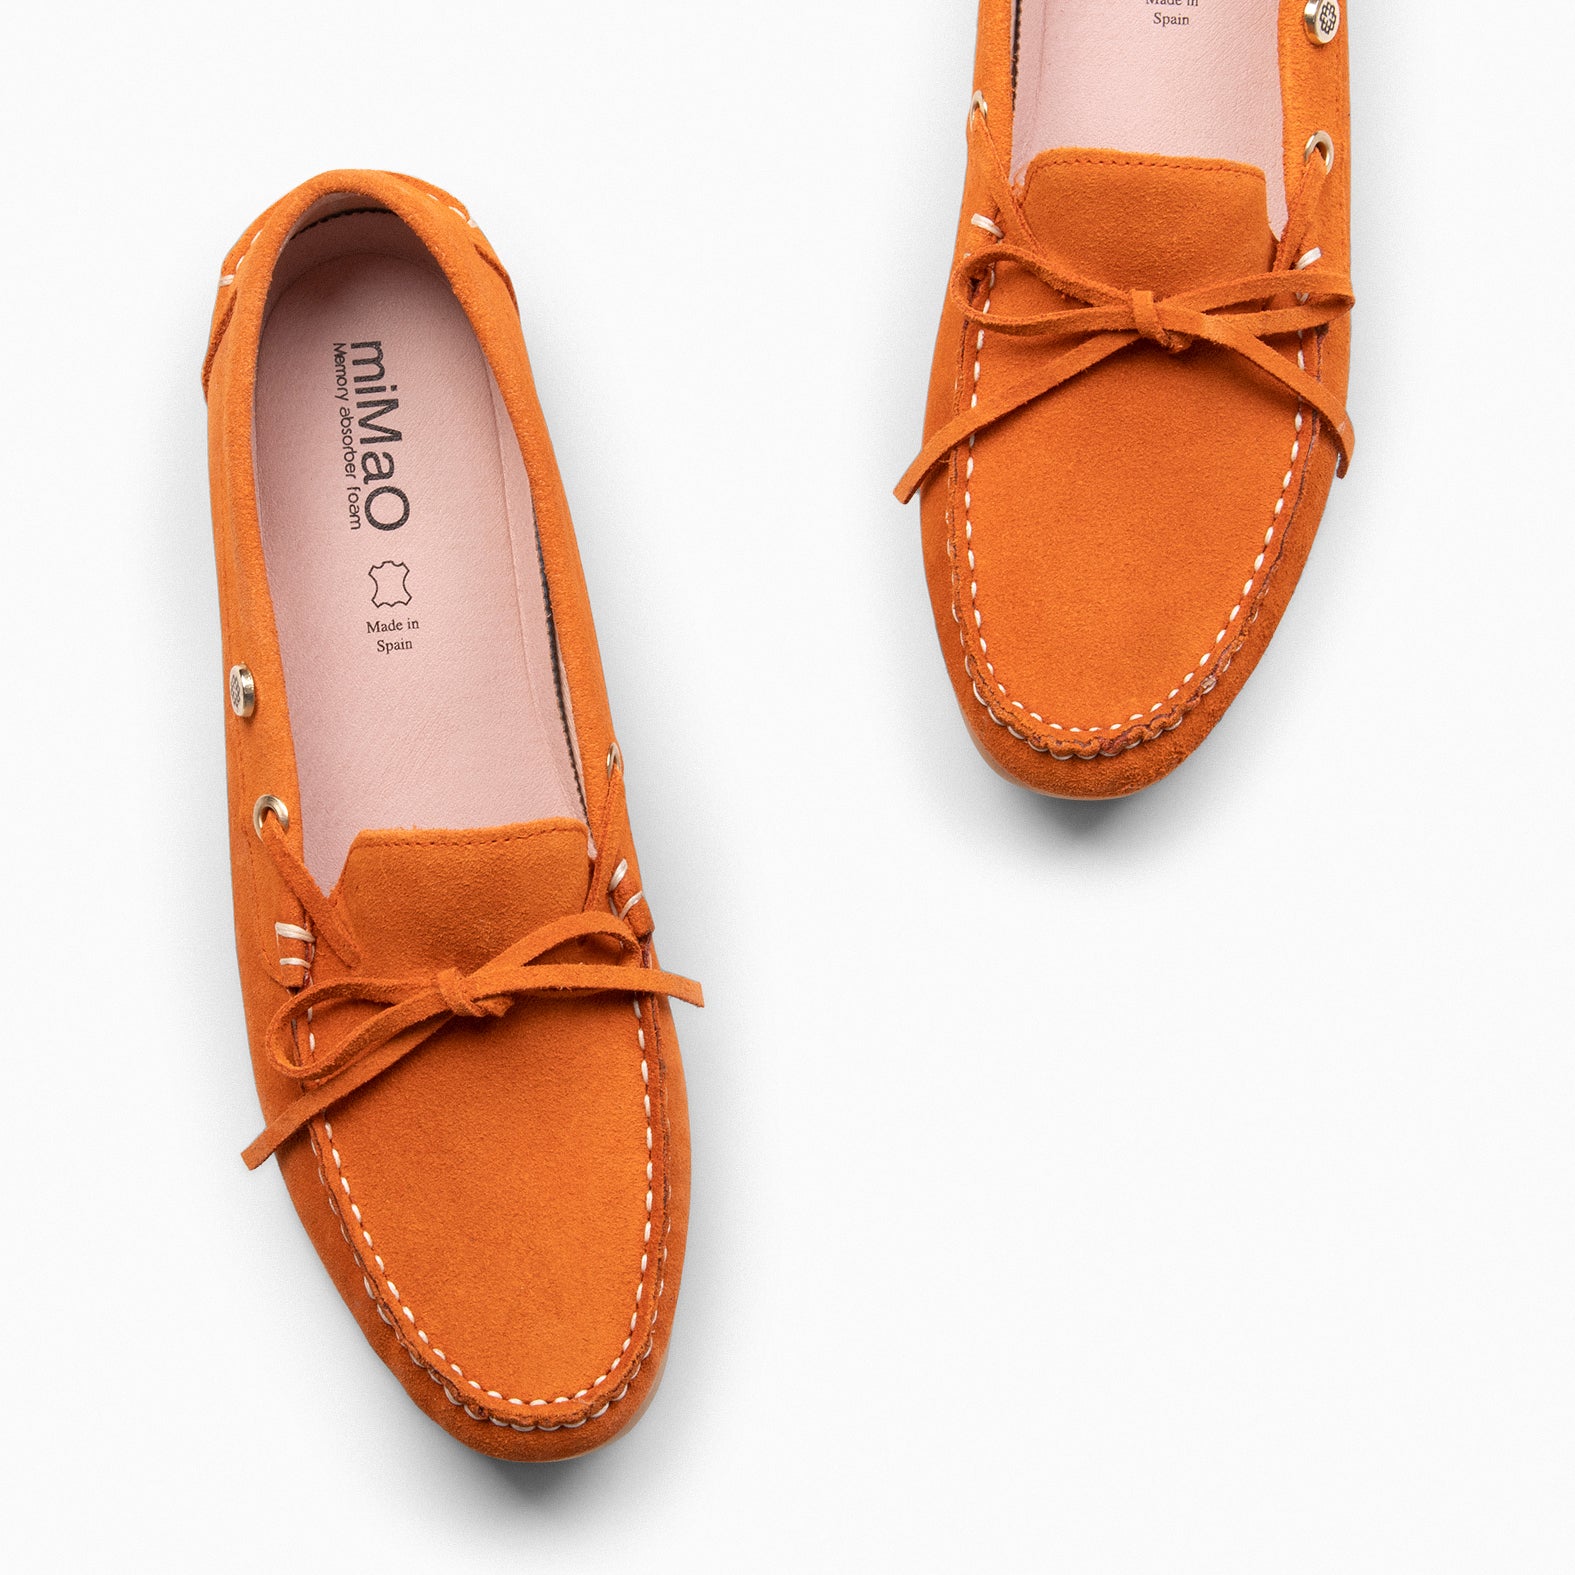 LACE – ORANGE moccasins with removable insole